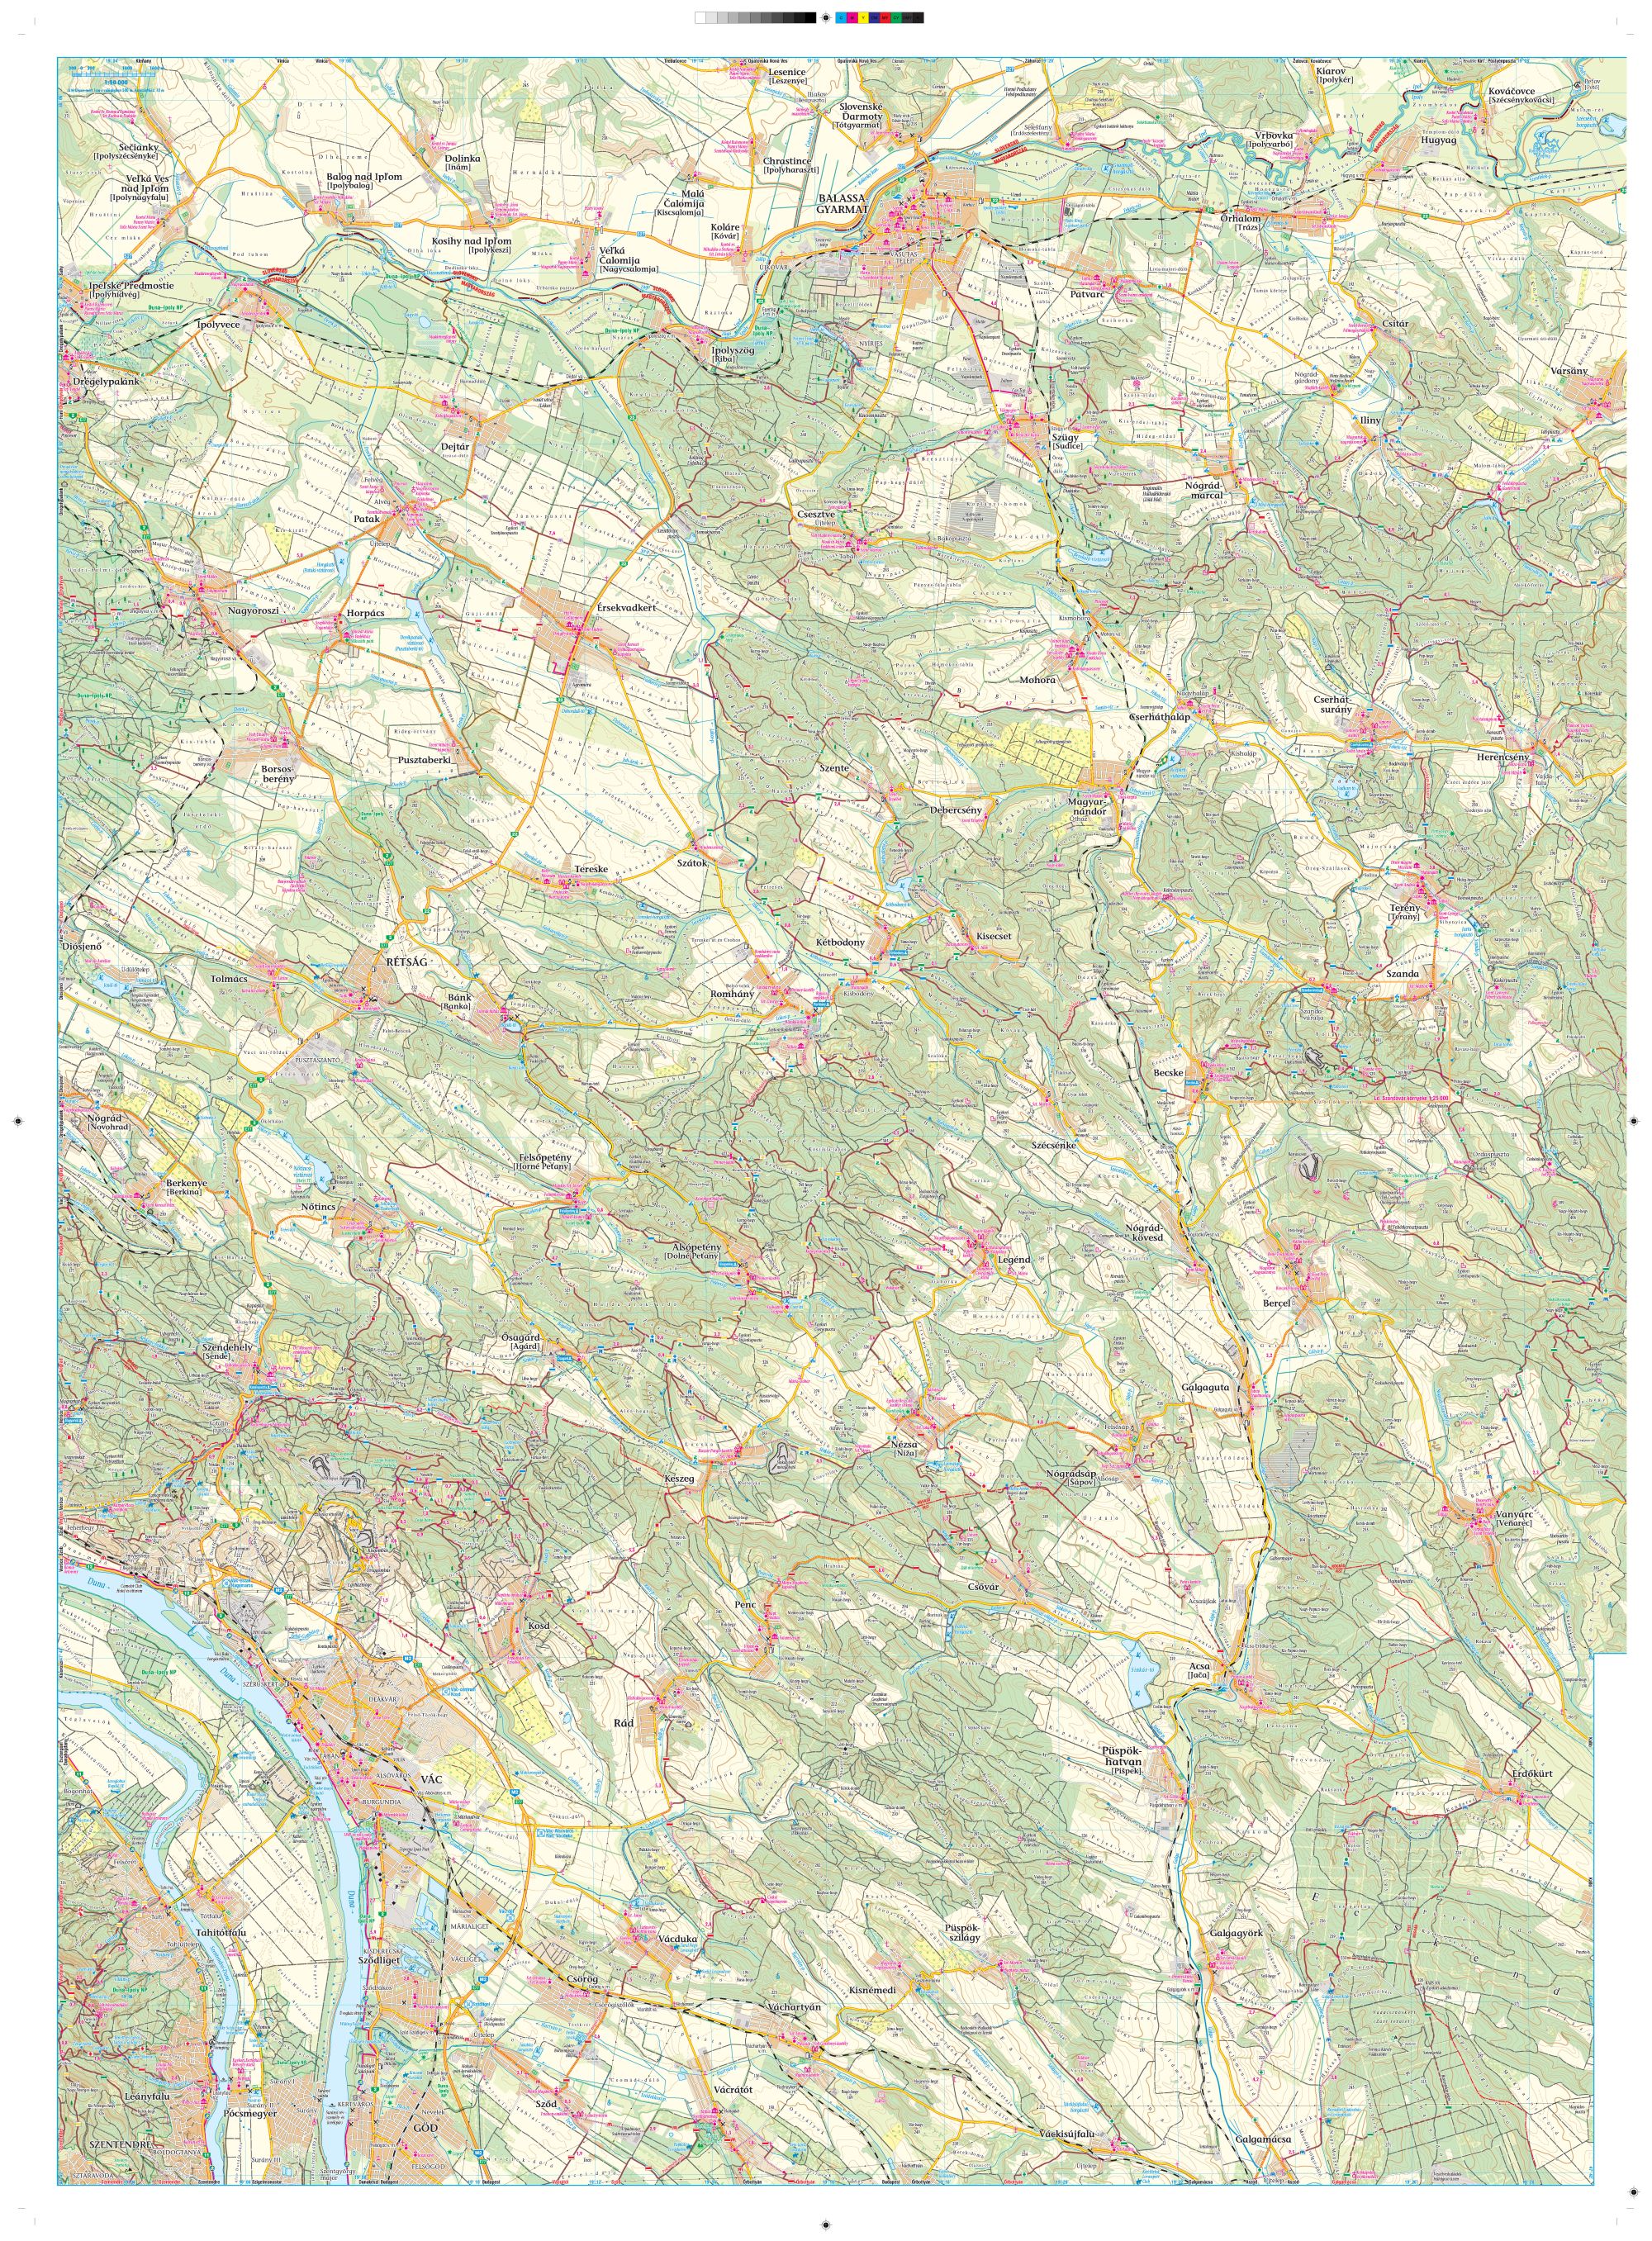 Cserhát 1:50.000 area covered by the West sheet